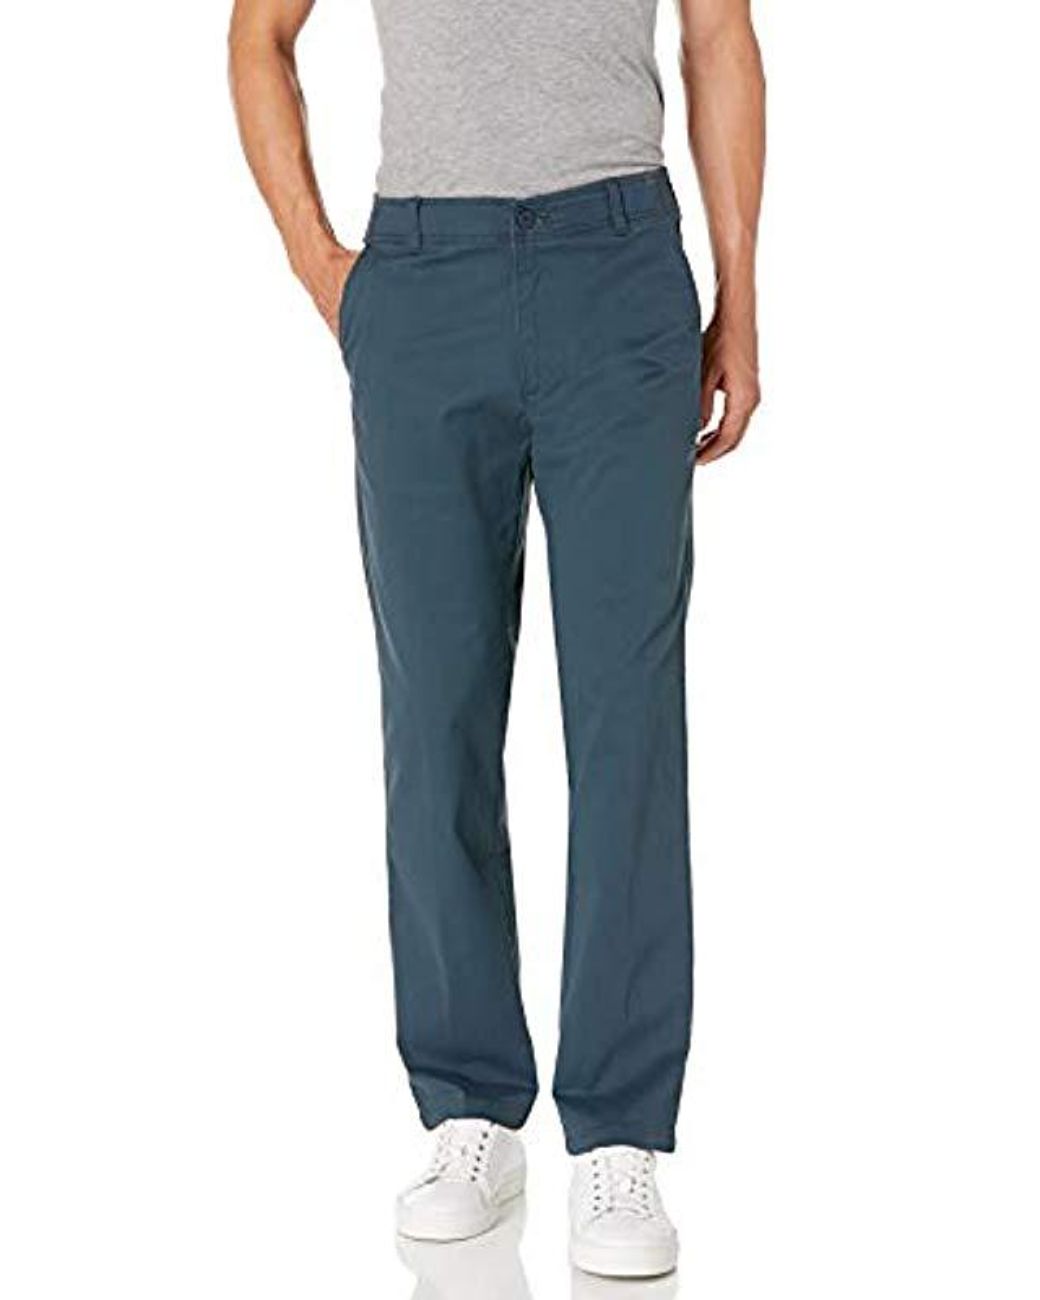 Lee Jeans Performance Series Extreme Comfort Straight Fit Pant in Blue ...